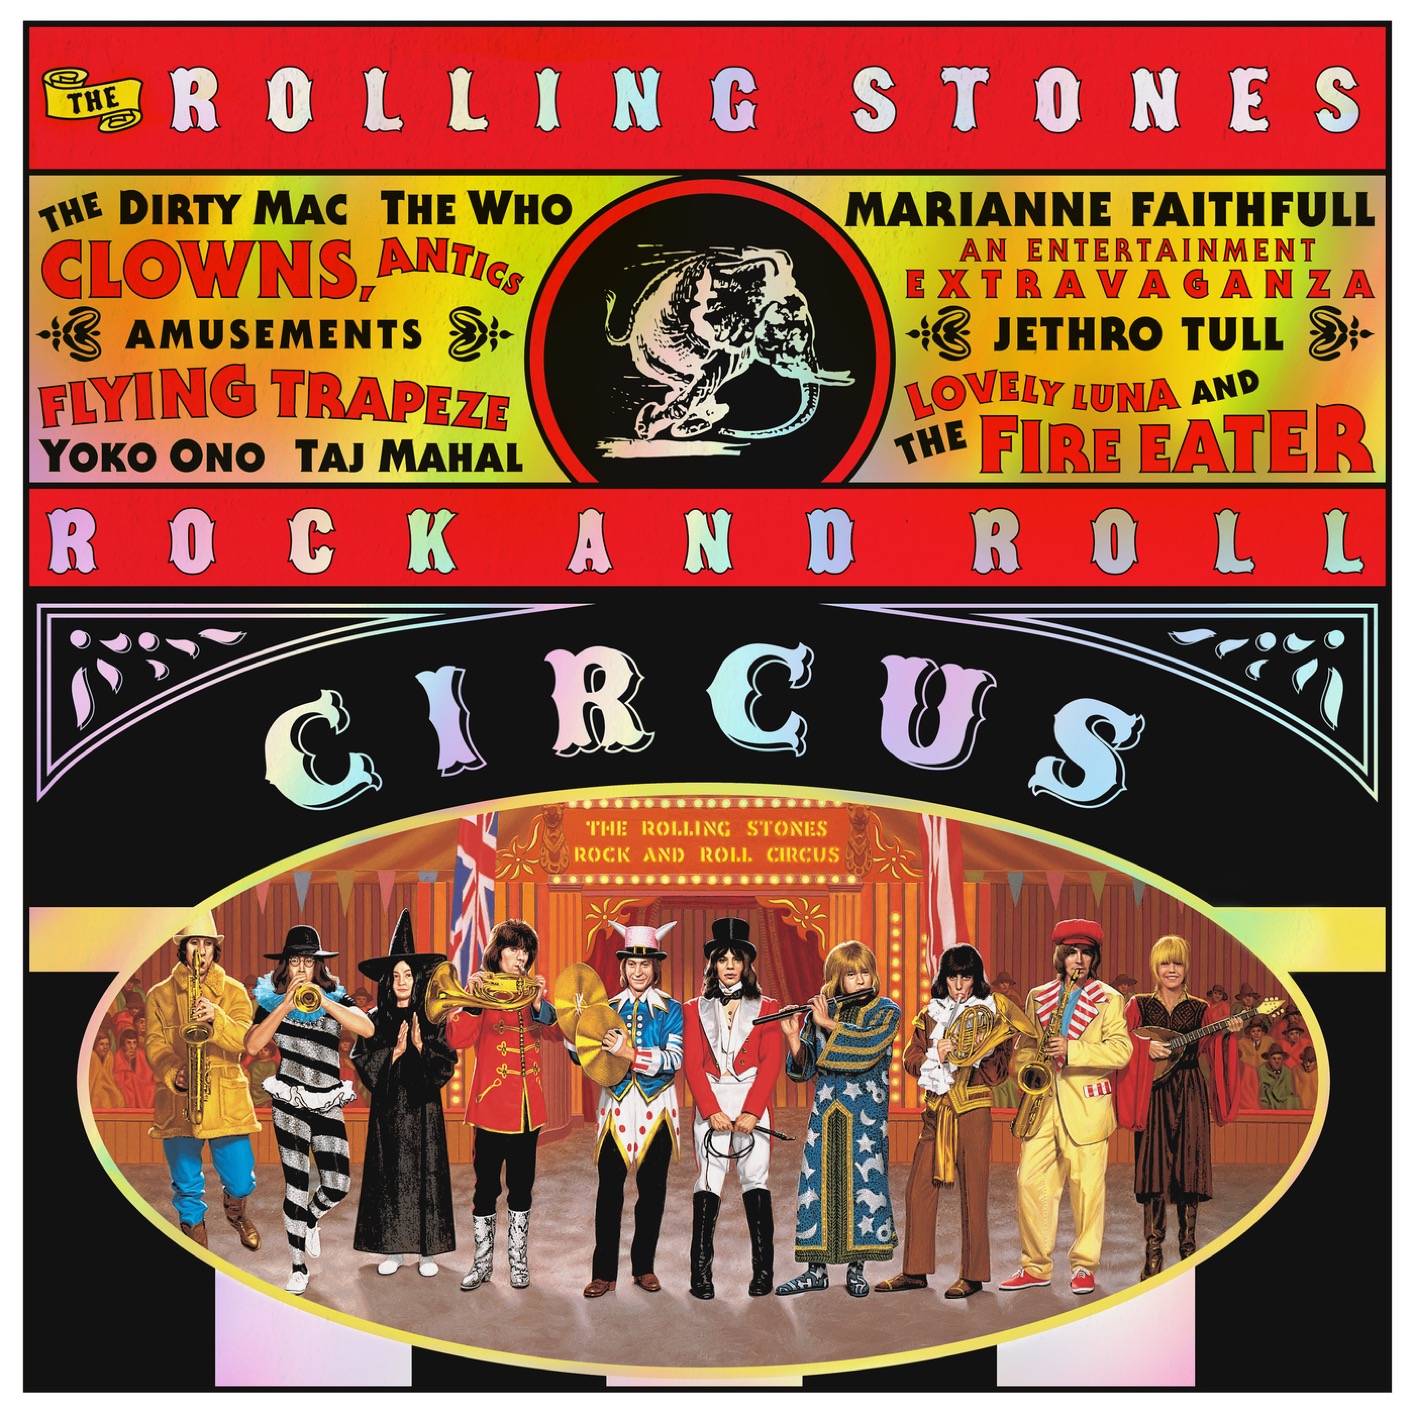 Various Artists - The Rolling Stones Rock And Roll Circus {Expanded} (2019) [FLAC 24bit/192kHz]